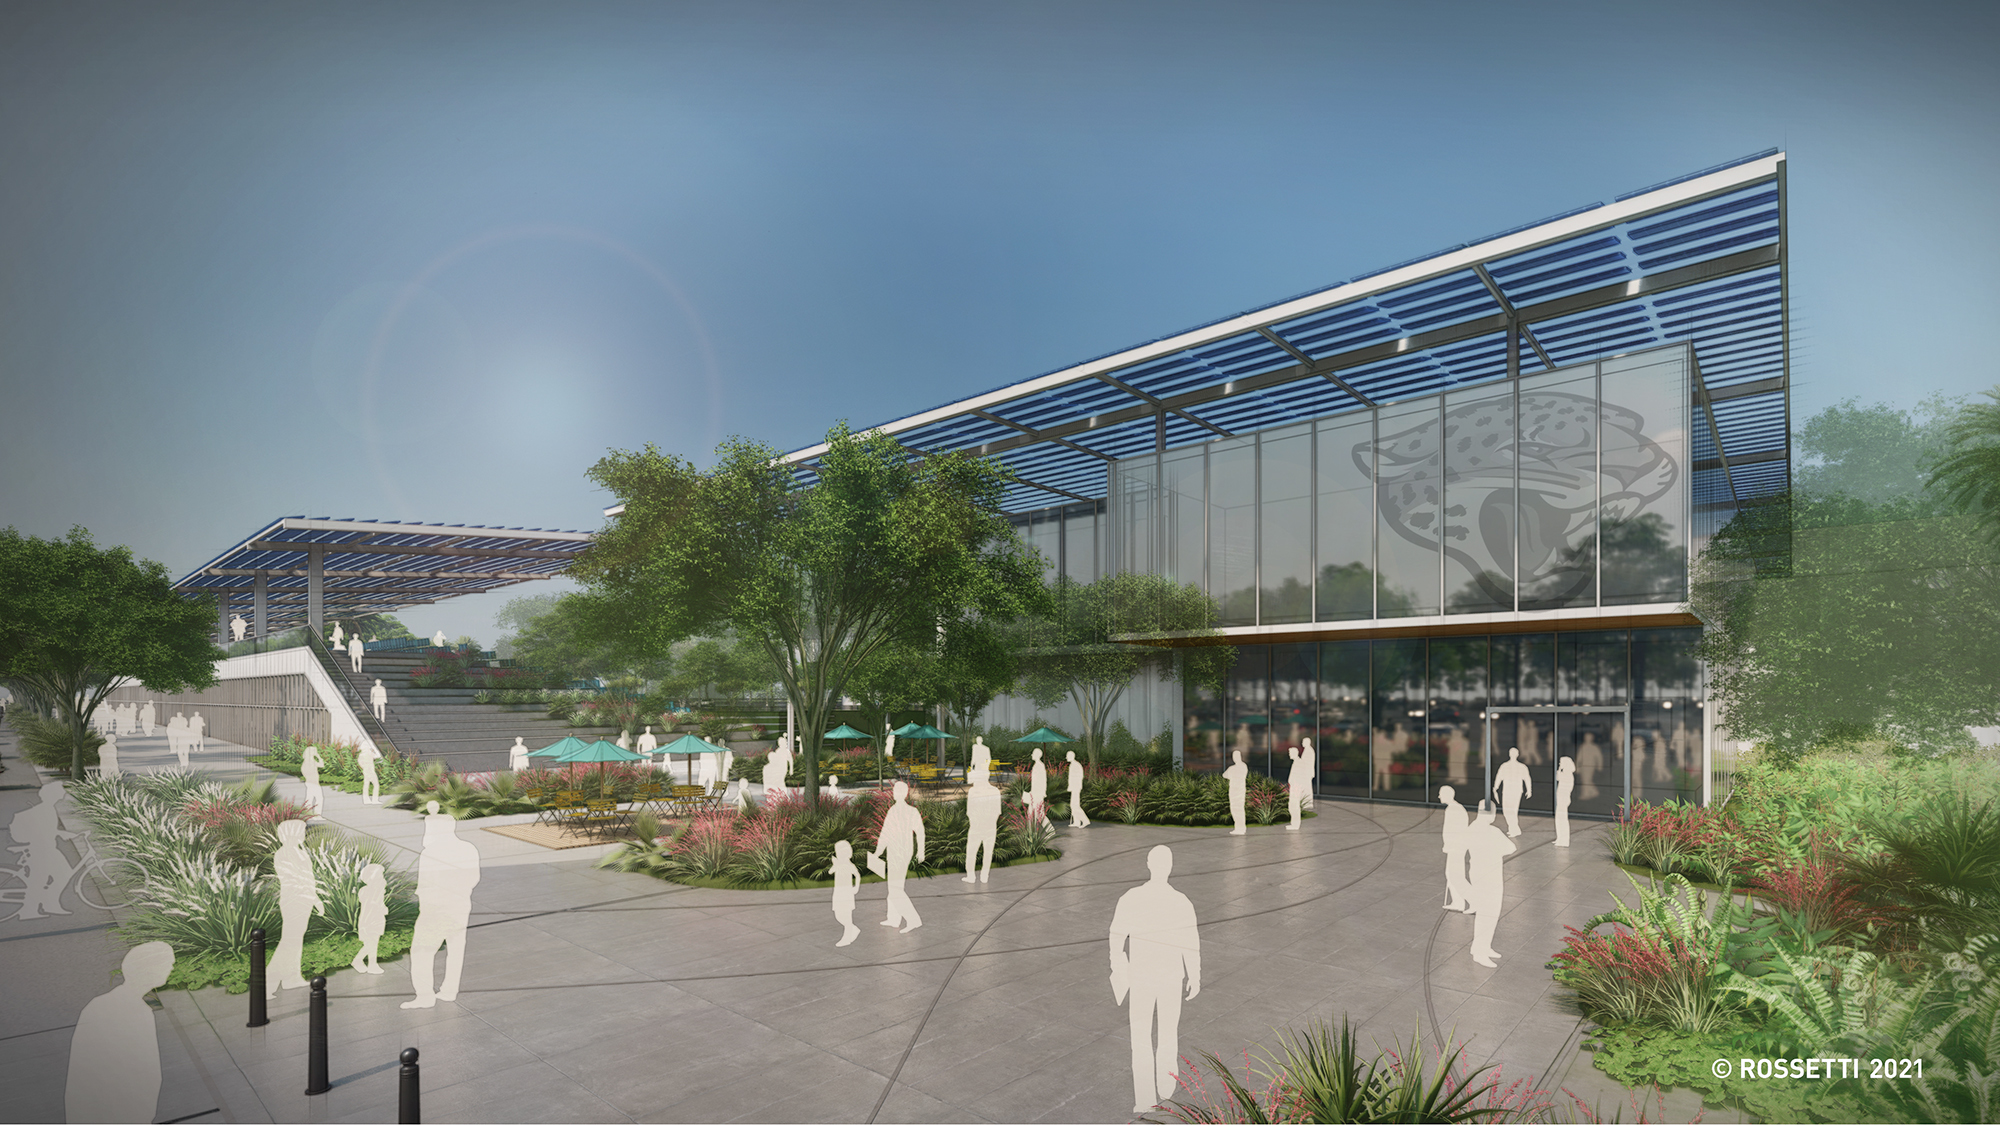 The football performance center will house the Jaguars' team offices.